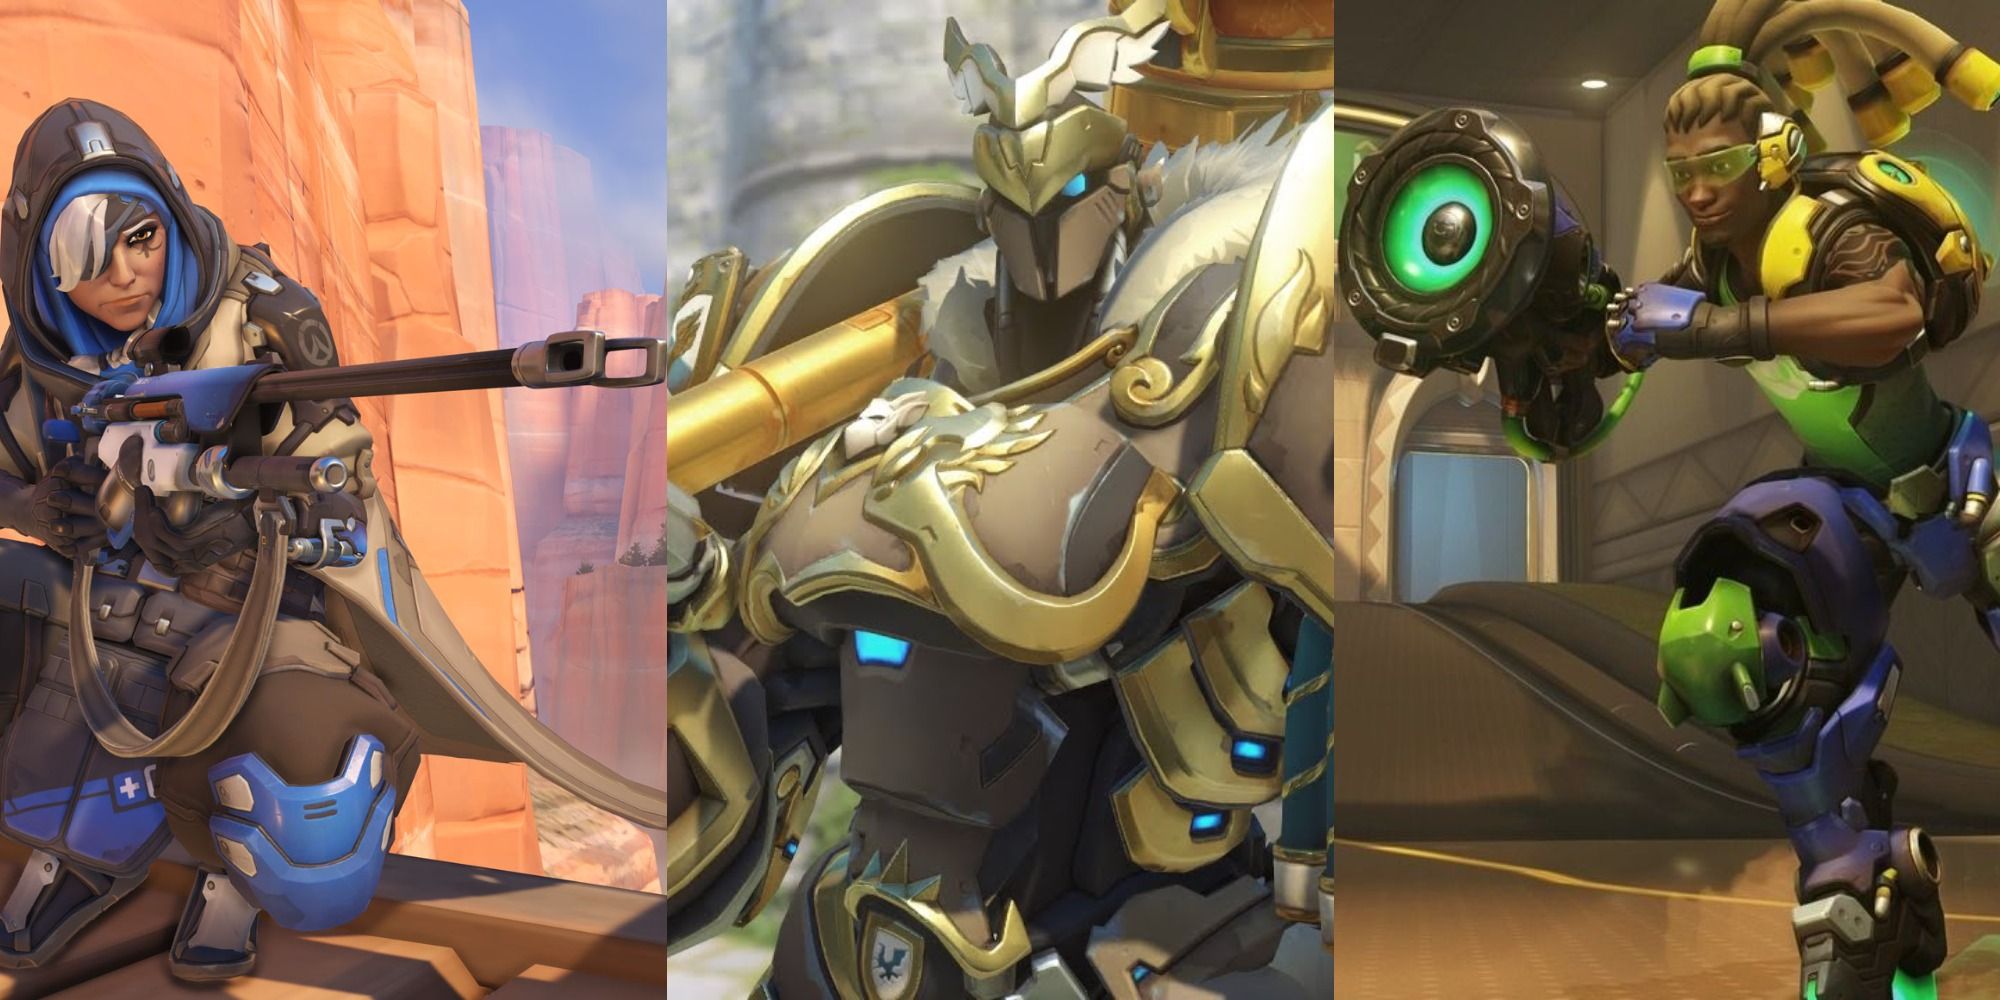 Collage of characters from Blizzard's Overwatch video game.